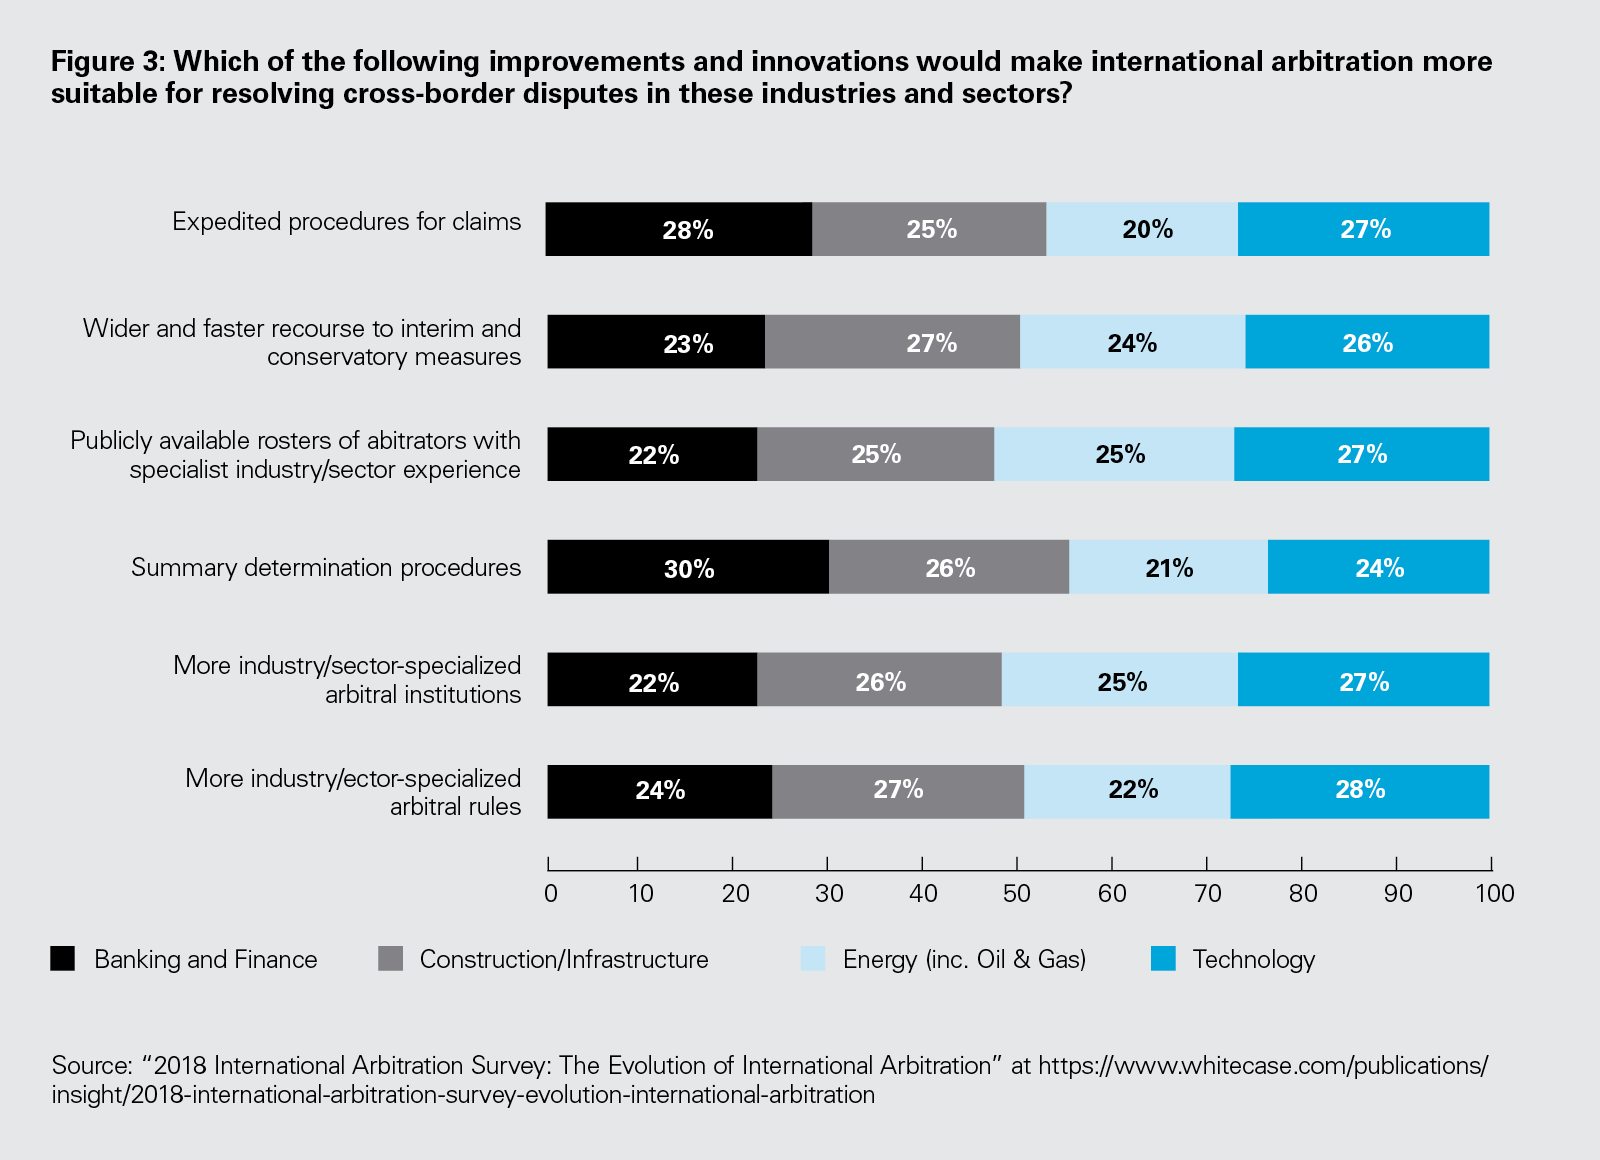 Figure 3: Which of the following improvements and innovations would make international arbitration more suitable for resolving cross-border disputes in these industries and sectors? (PNG)